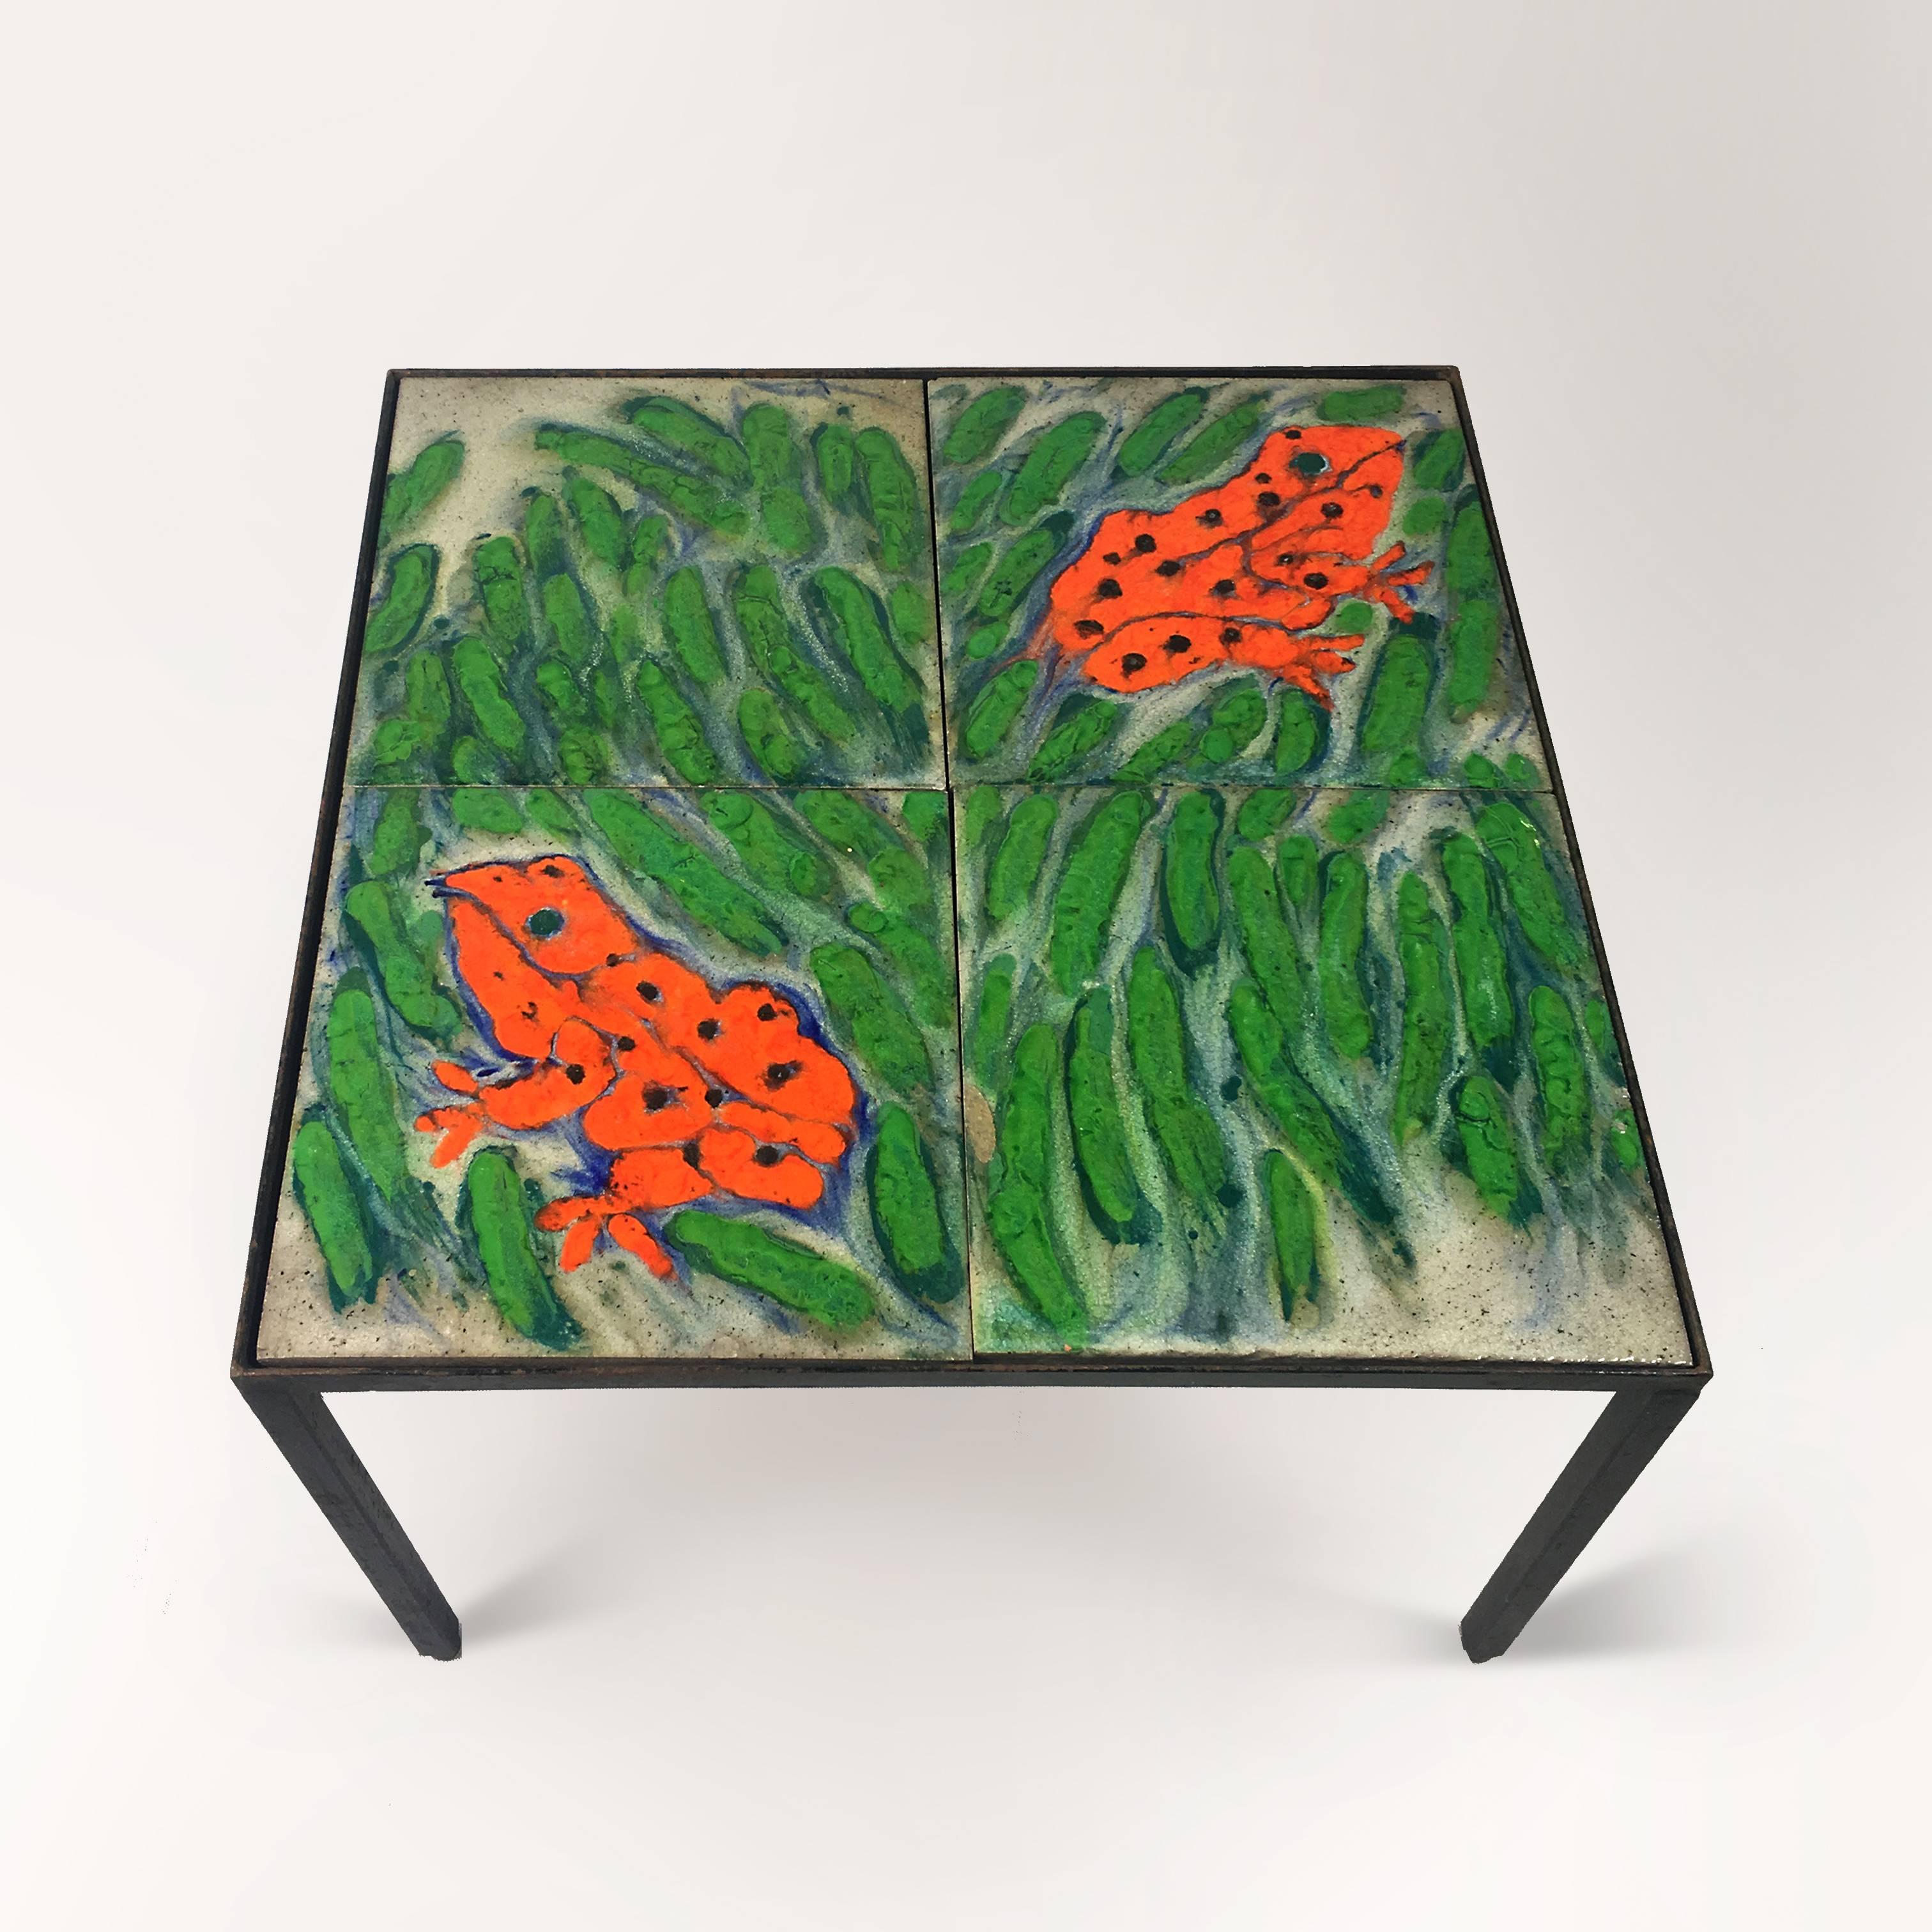 Bright square coffee table of 1960s. Metal base, decorated with four hand-painted glazed ceramic tiles. The symmetrical drawing depicts two neon-orange frogs in the green grass.
Unknown artist.